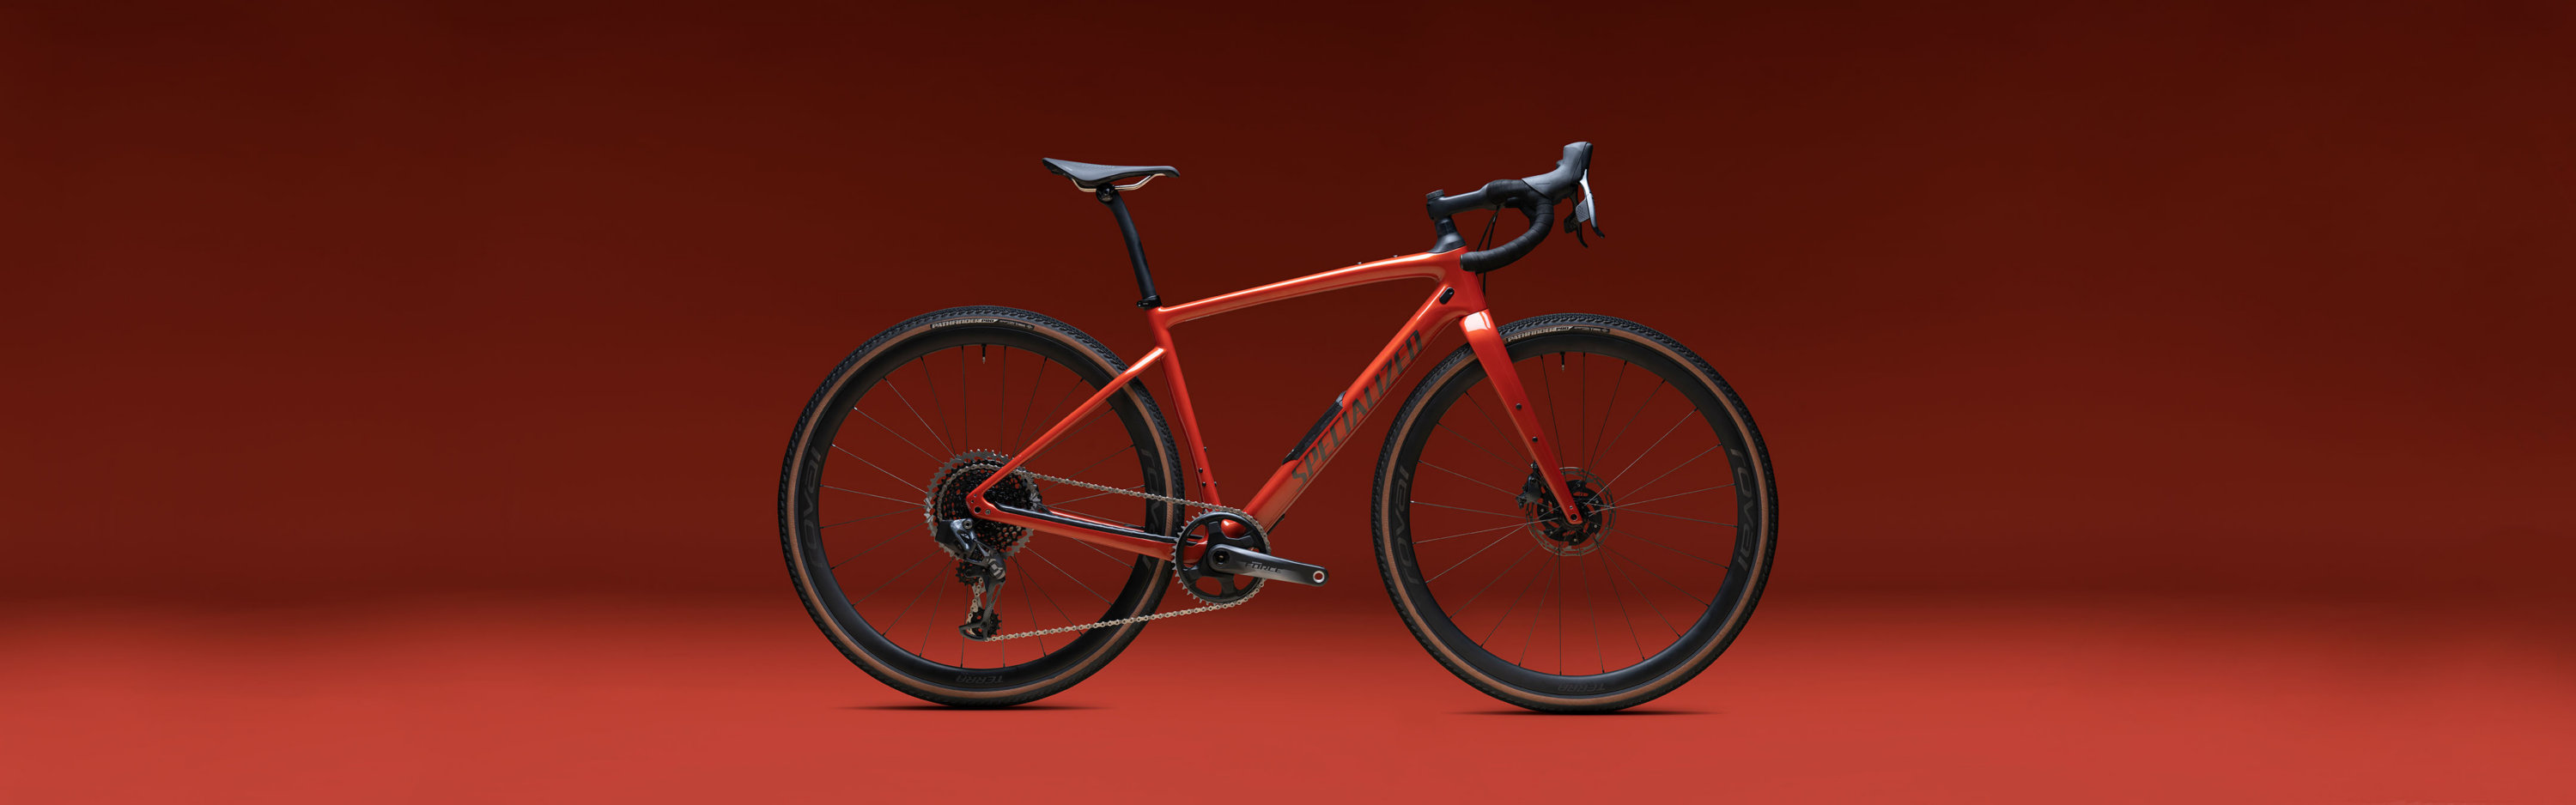 specialized diverge 52